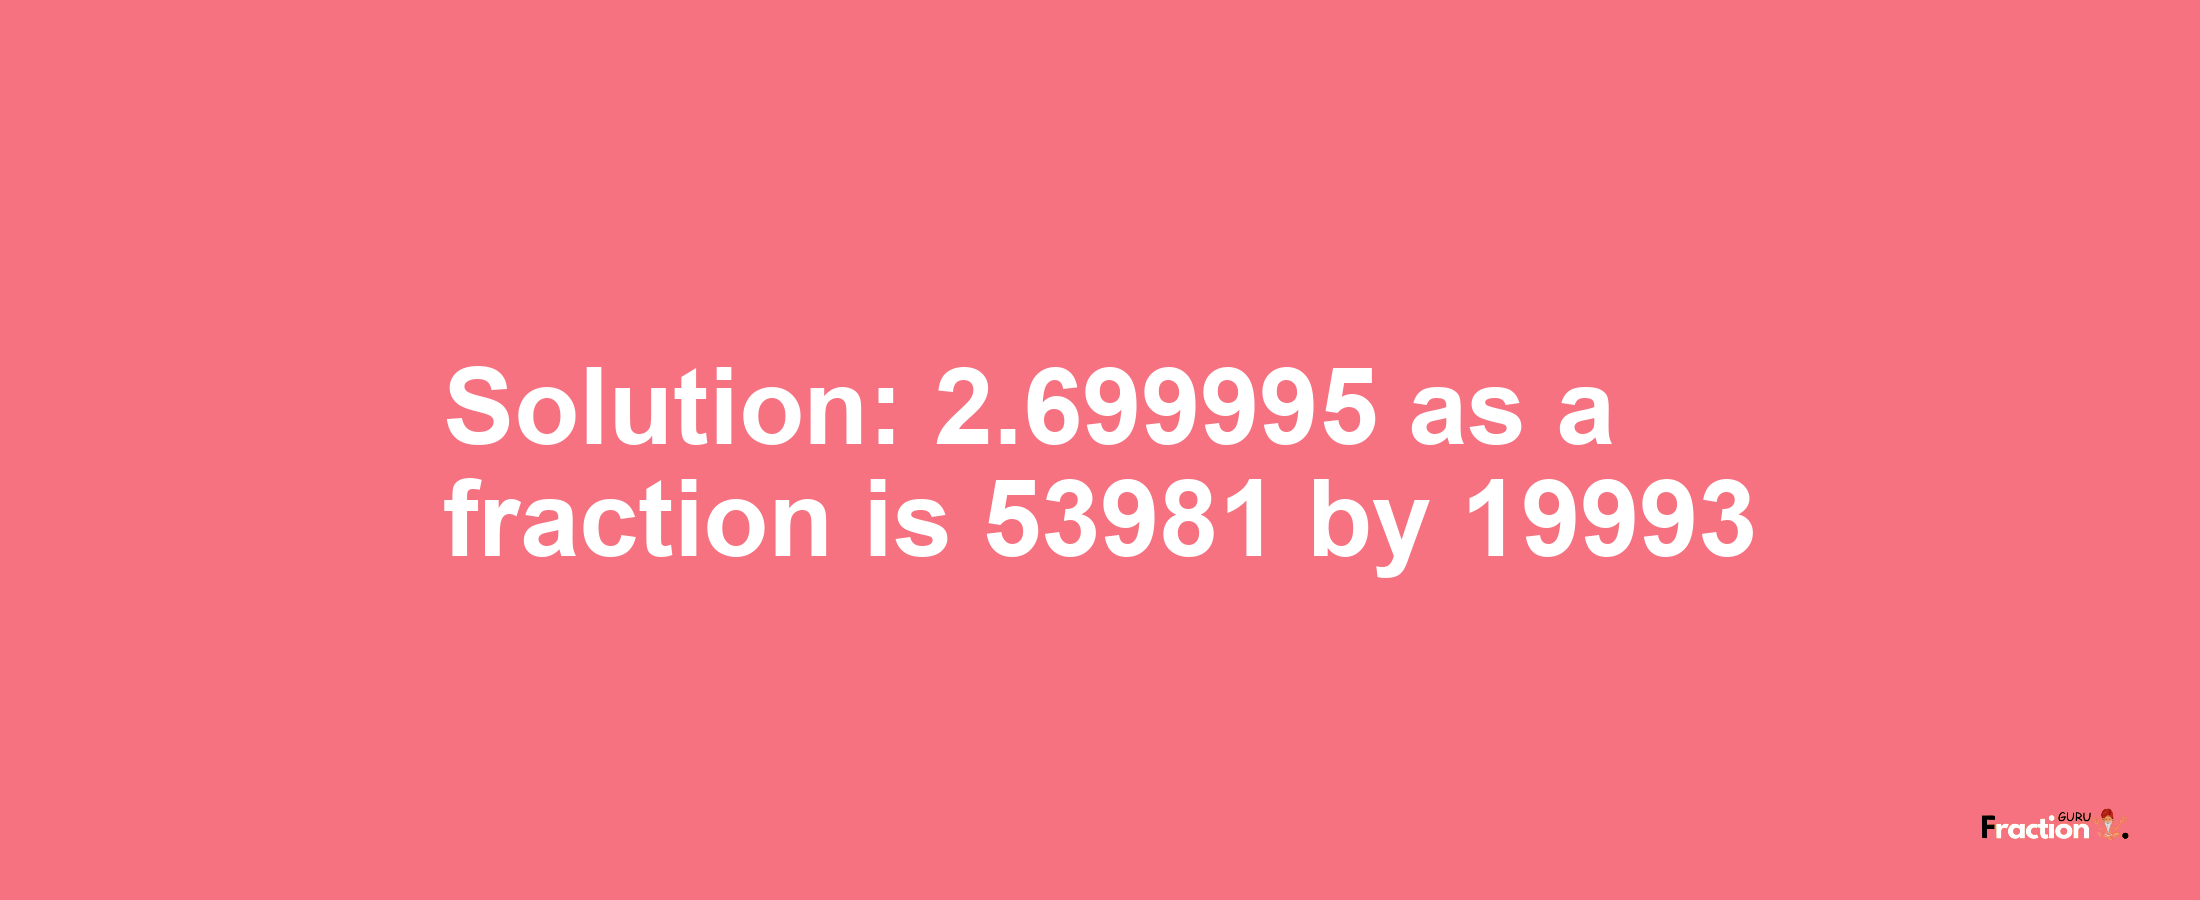 Solution:2.699995 as a fraction is 53981/19993